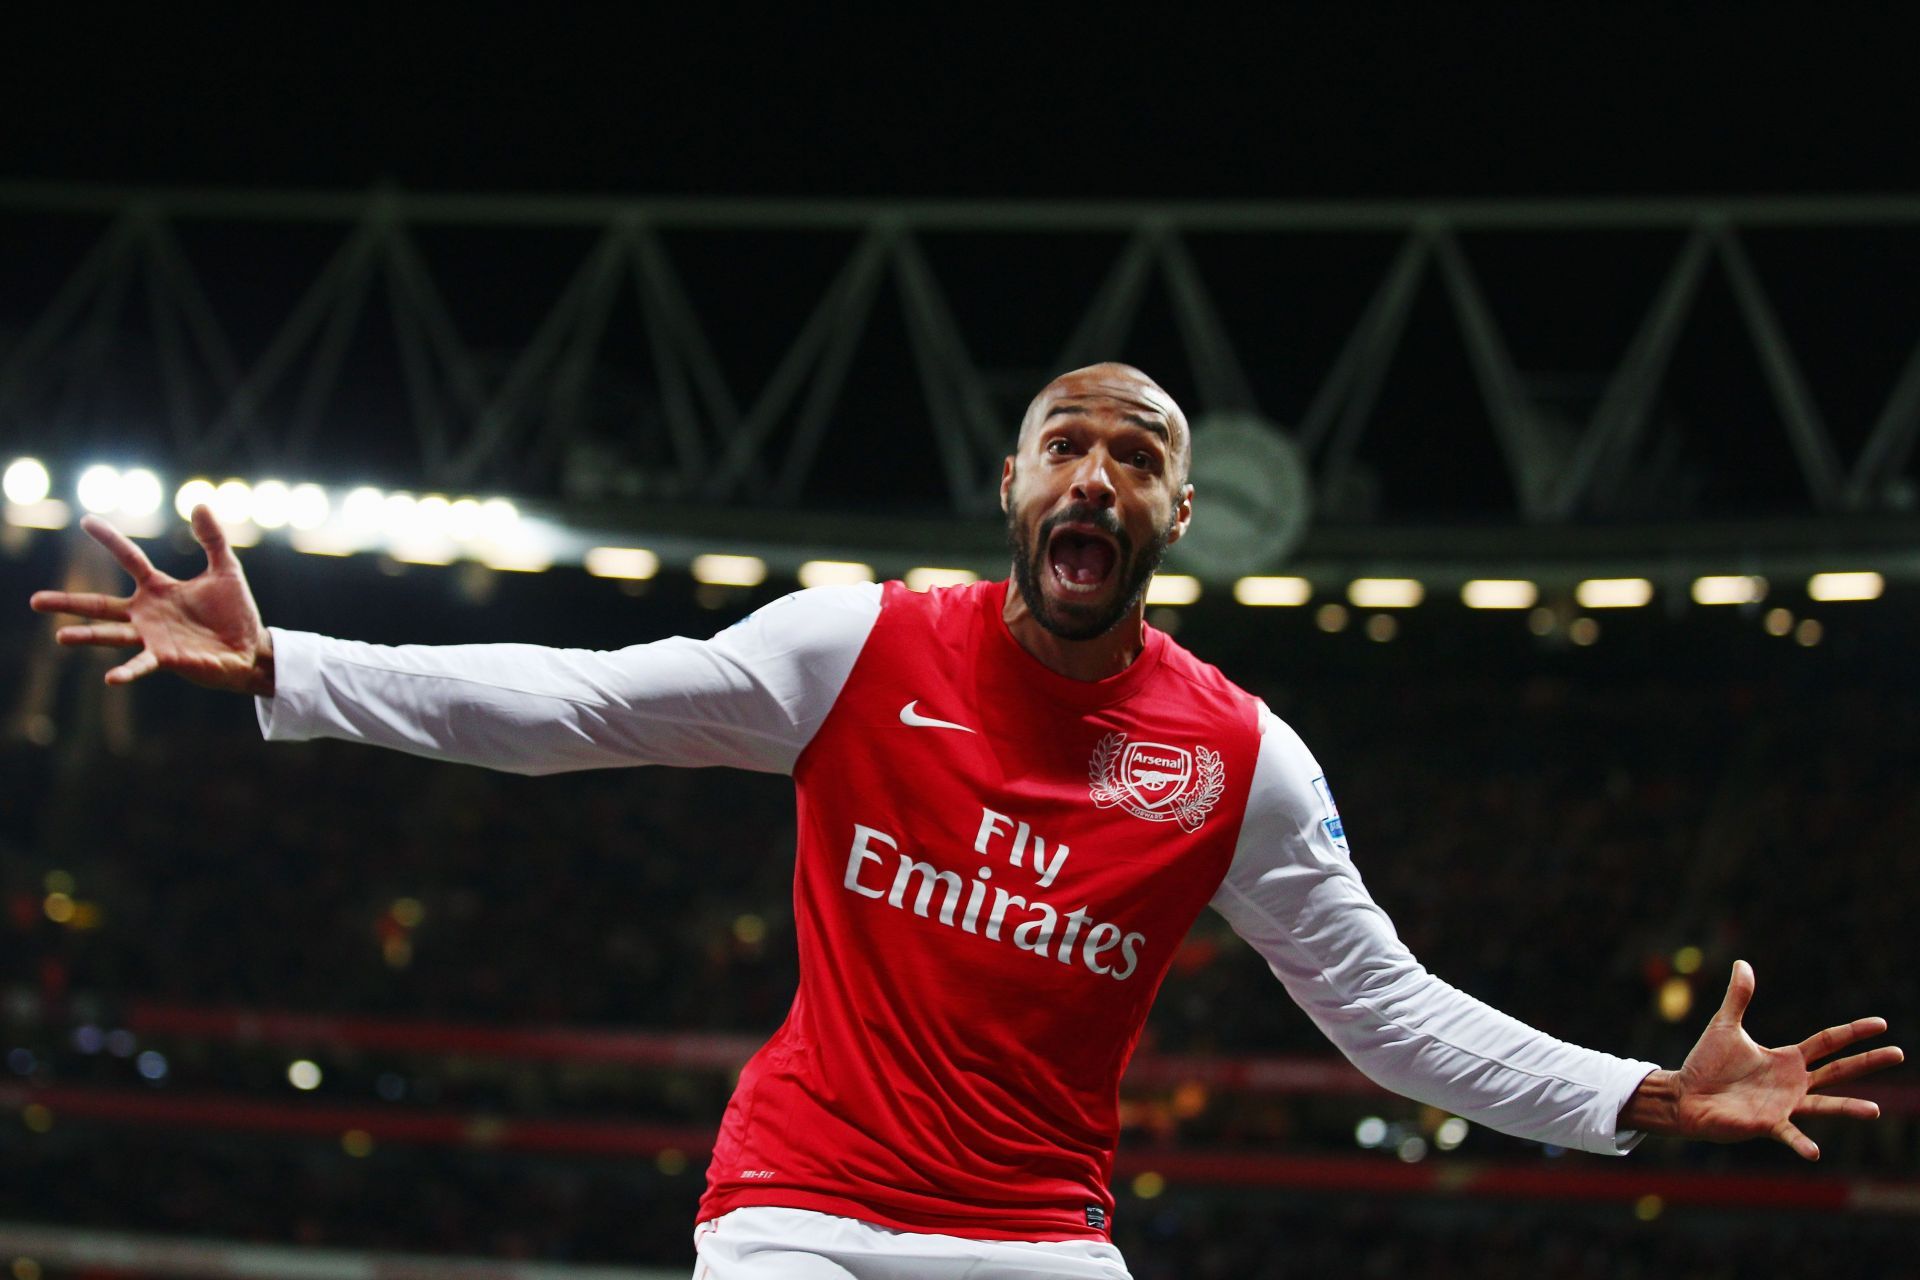 Henry is considered as an Arsenal legend